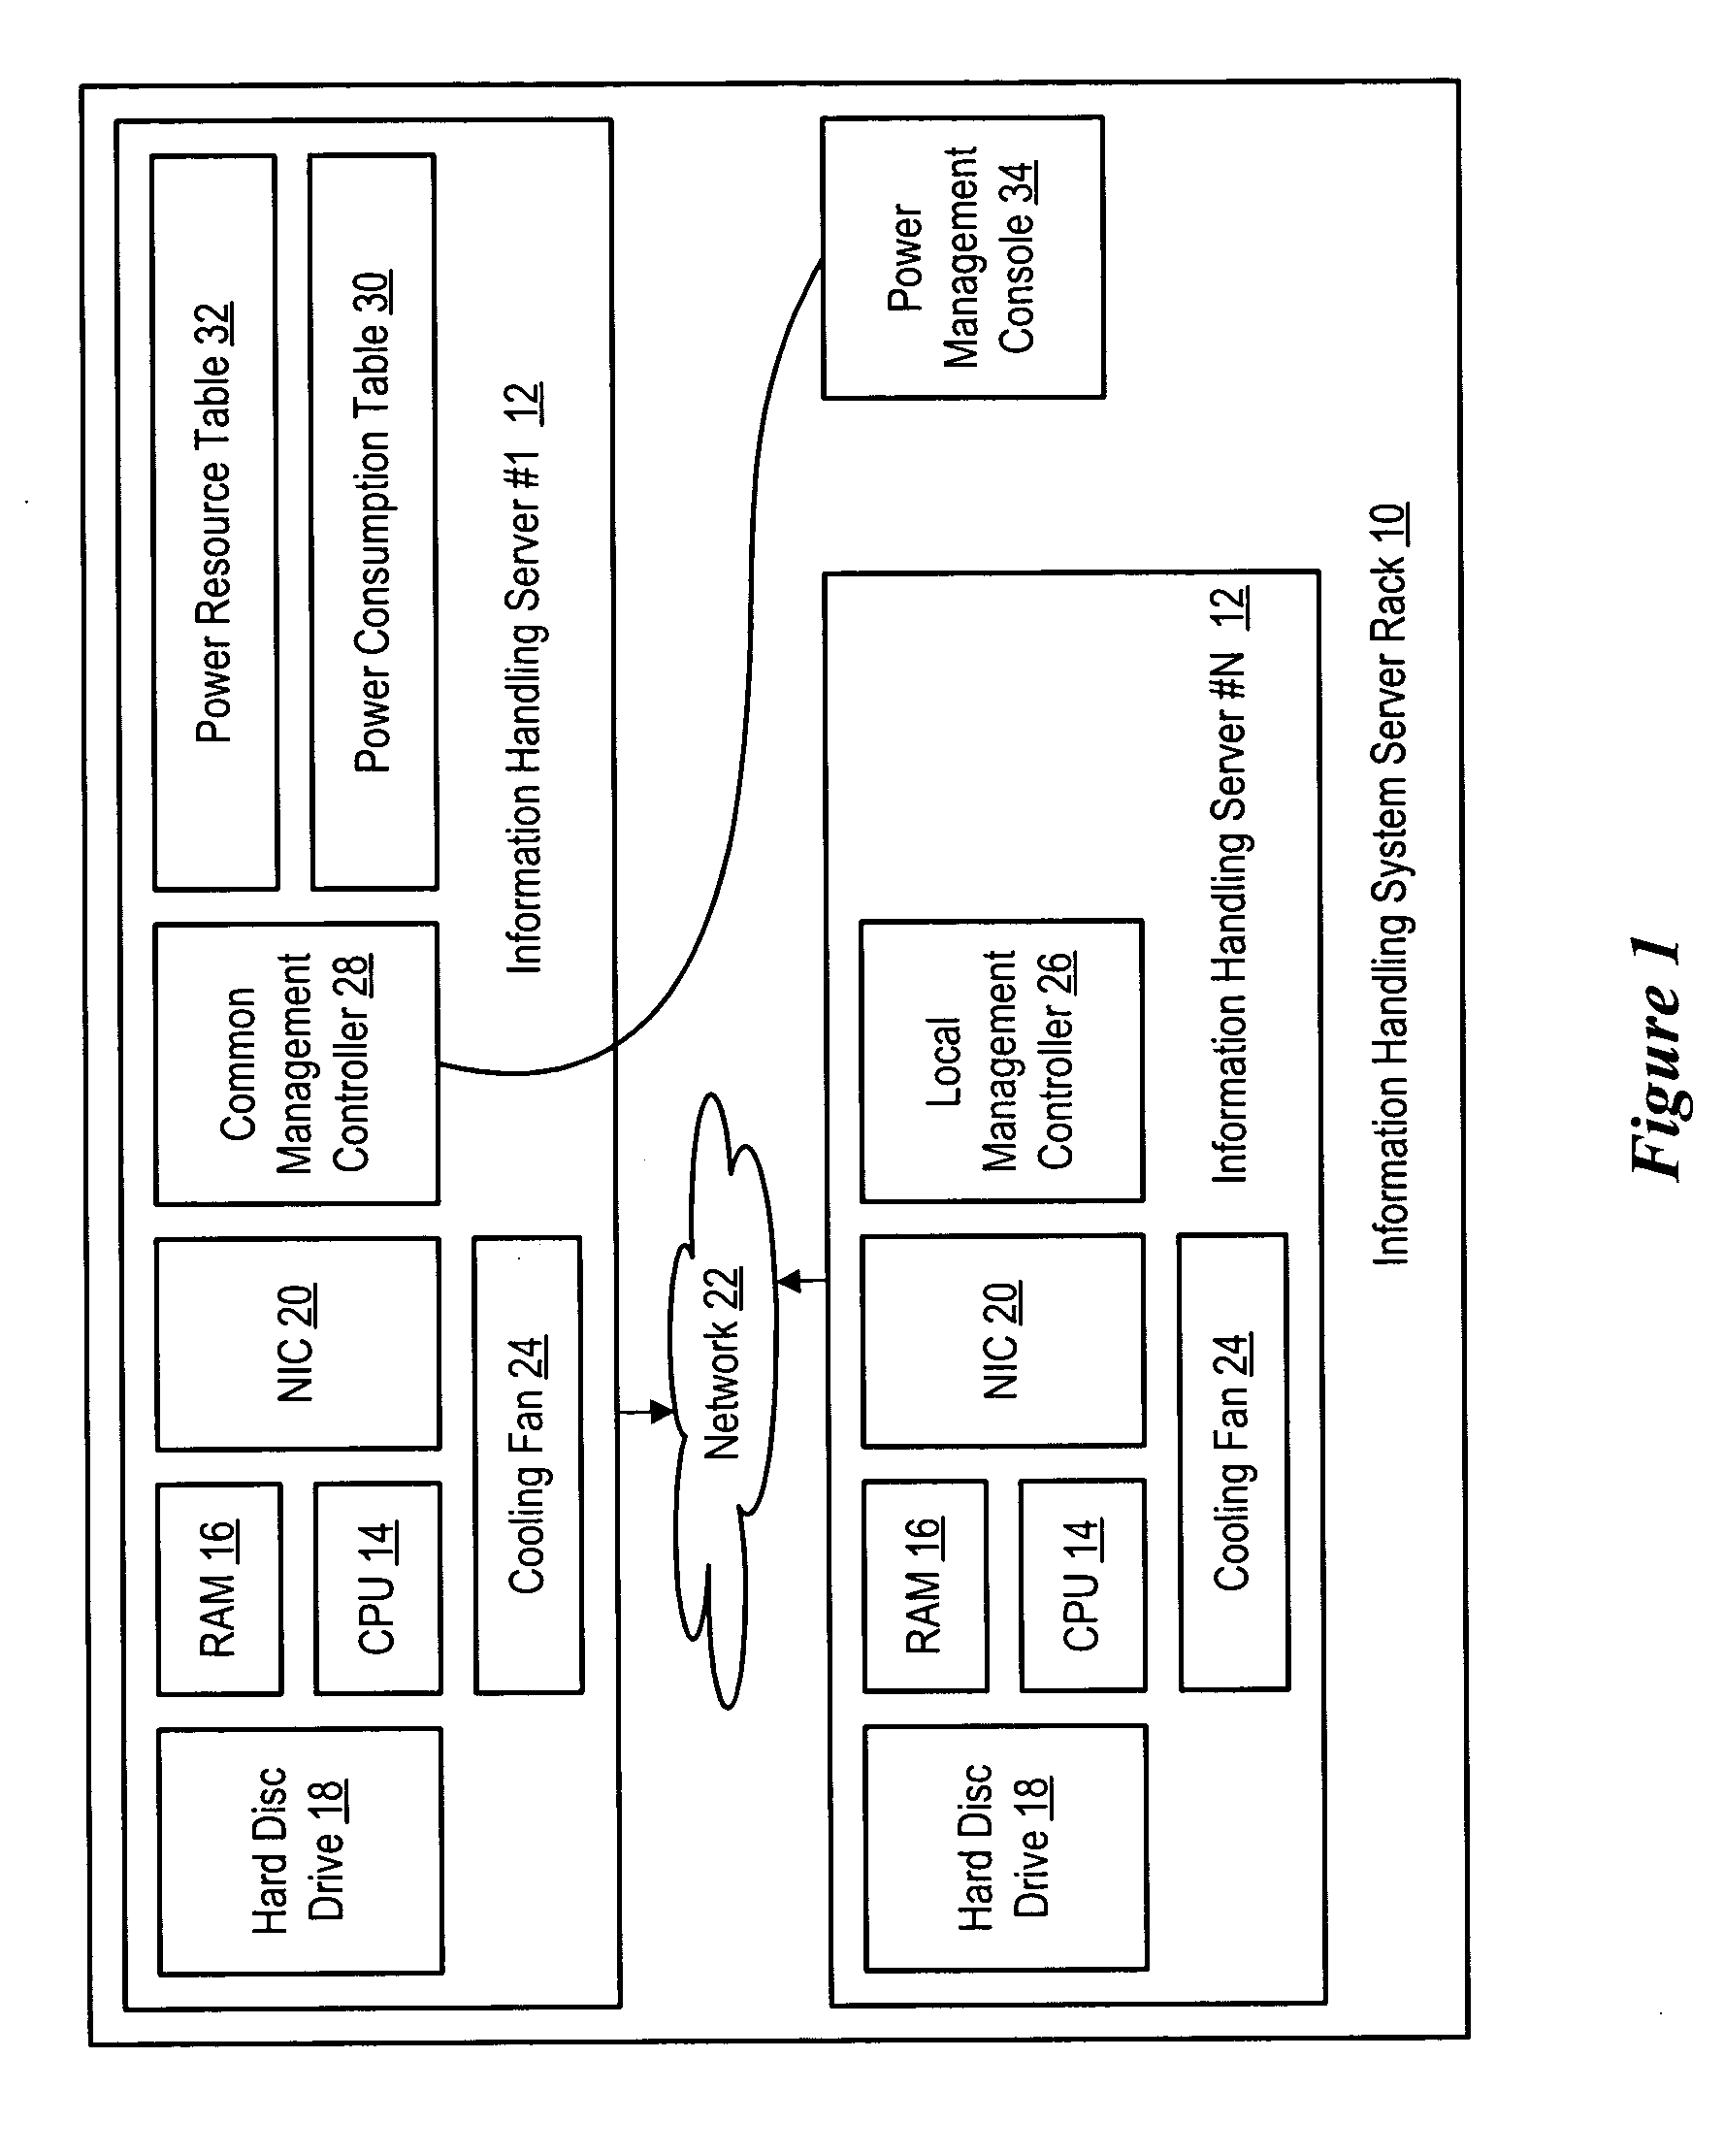 System and method for power management of plural information handling systems